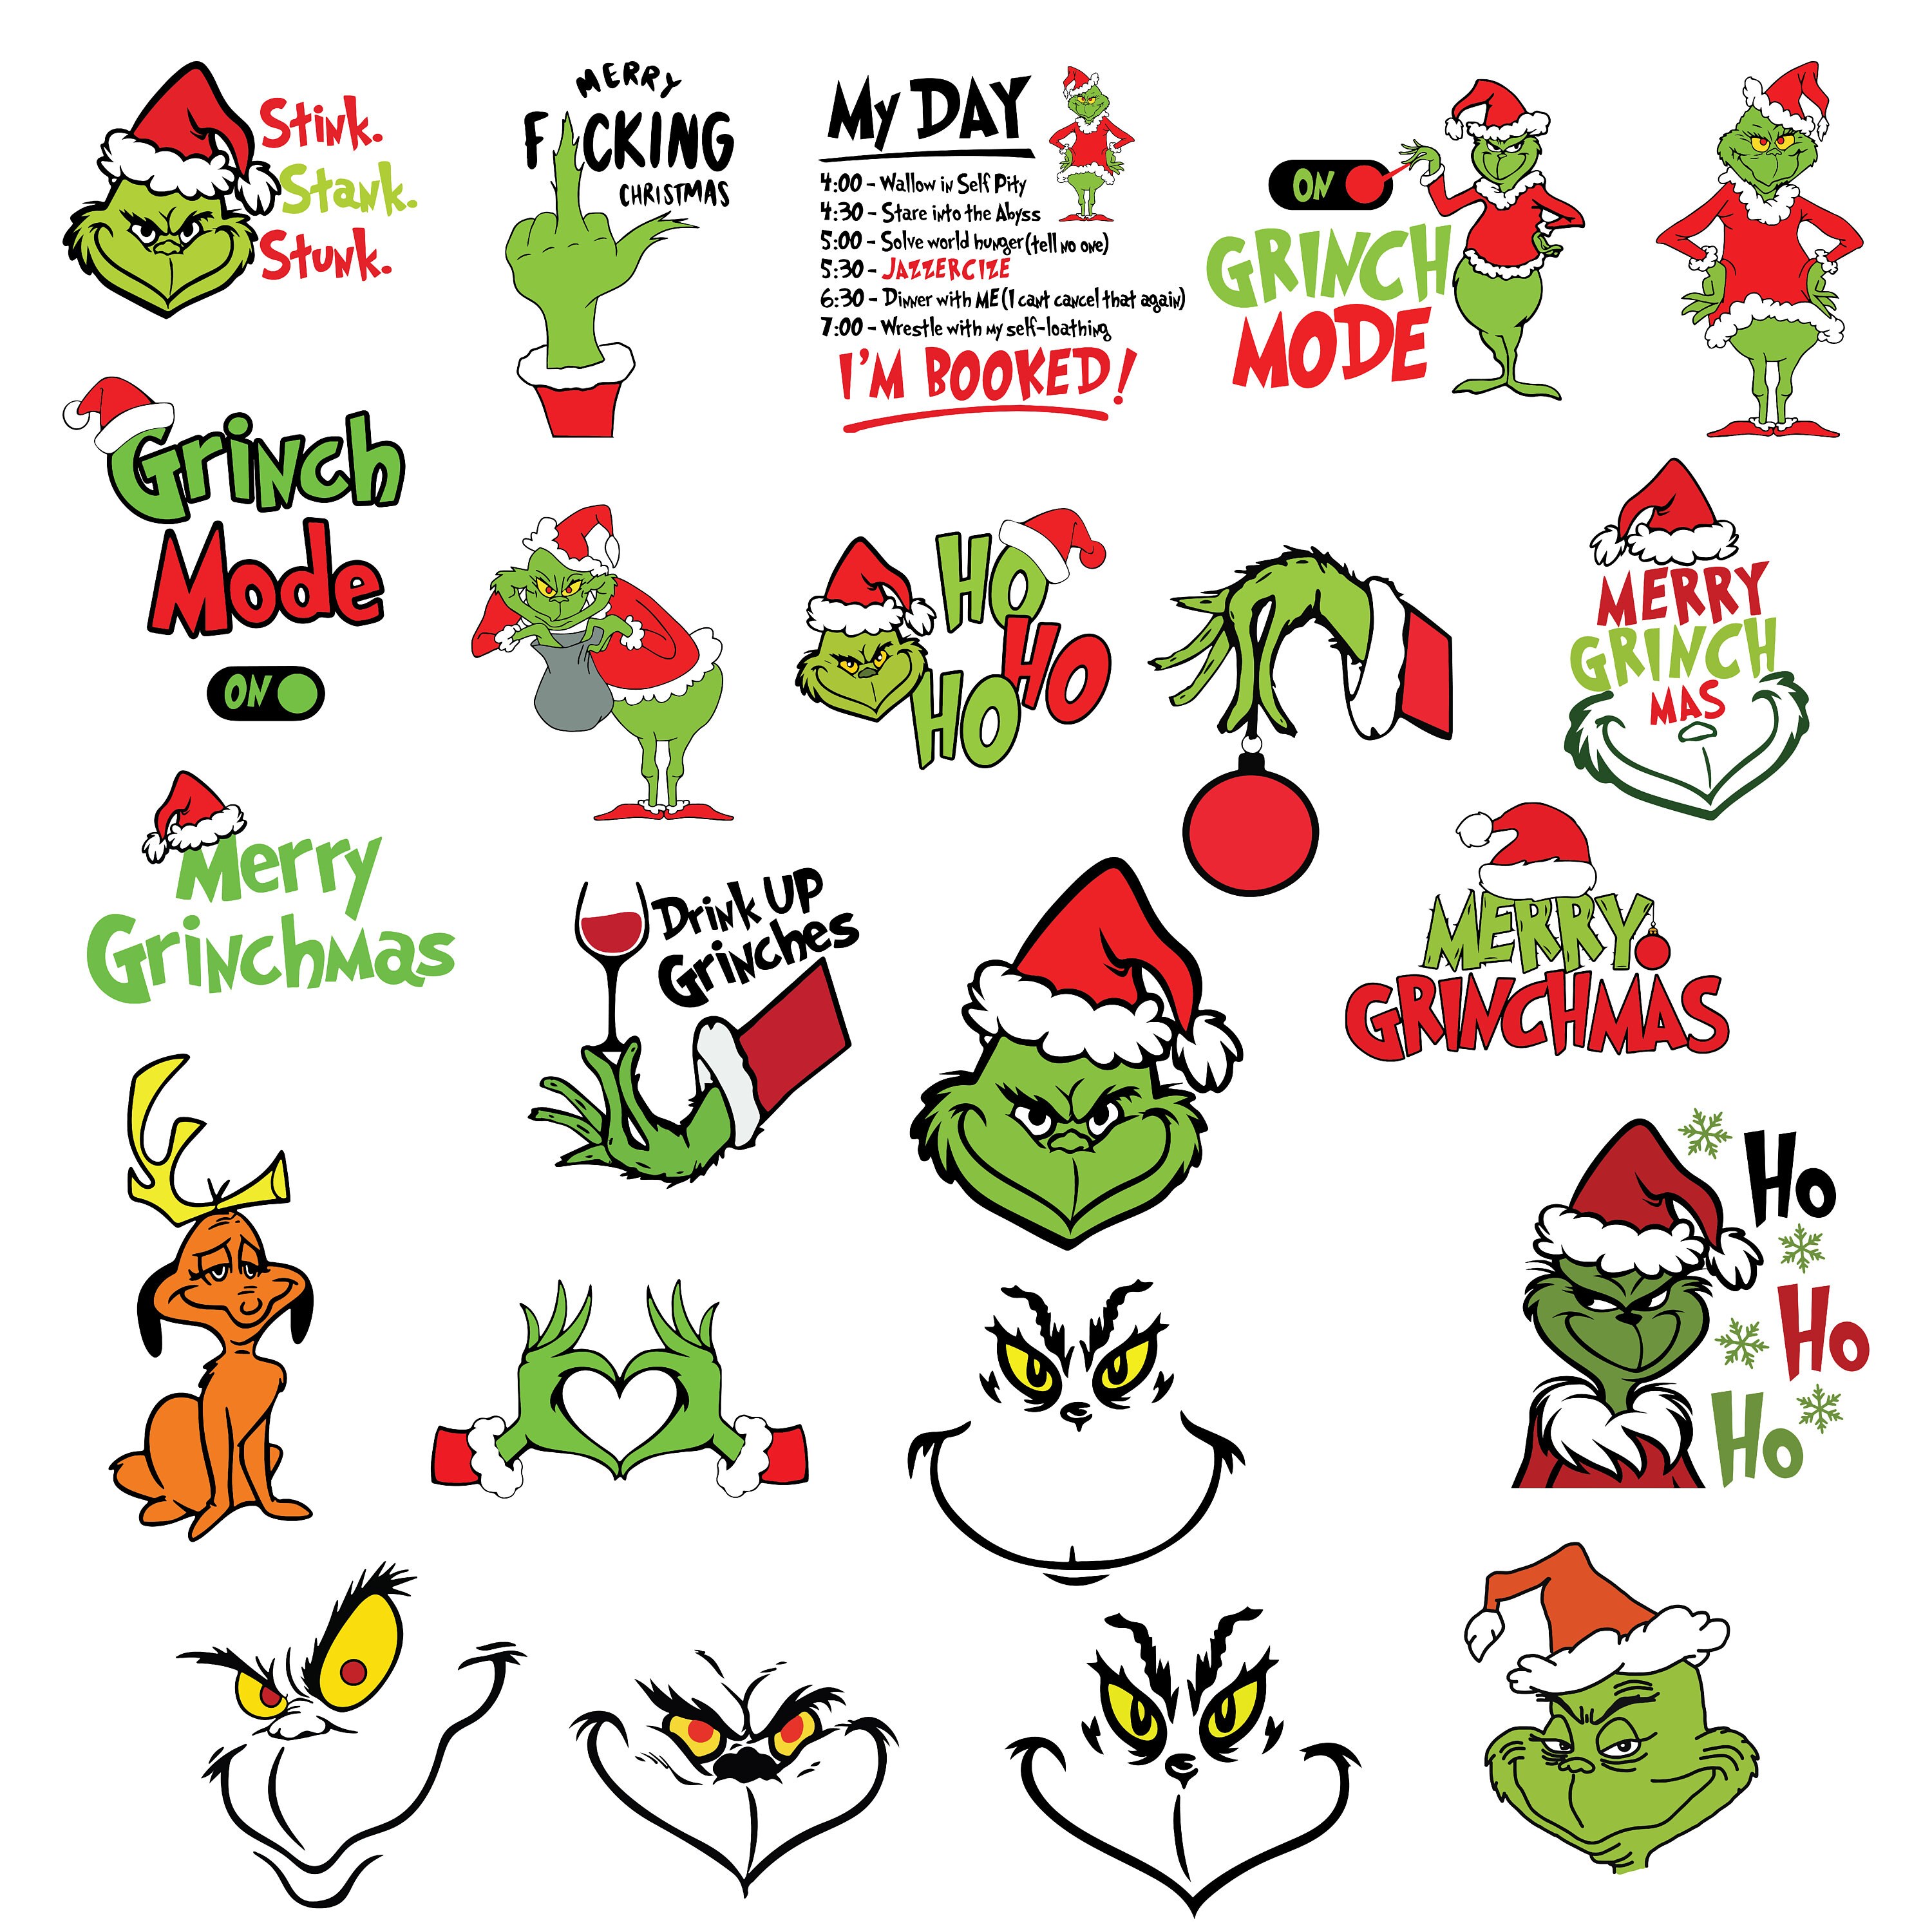 That's It I'm Not Going Svg, Grinch Svg, the Grinch, Grinc Svg Cricut,  Grinc Christmas Svg, Grinc Shirts, Grinc Svgs, Digital Download 